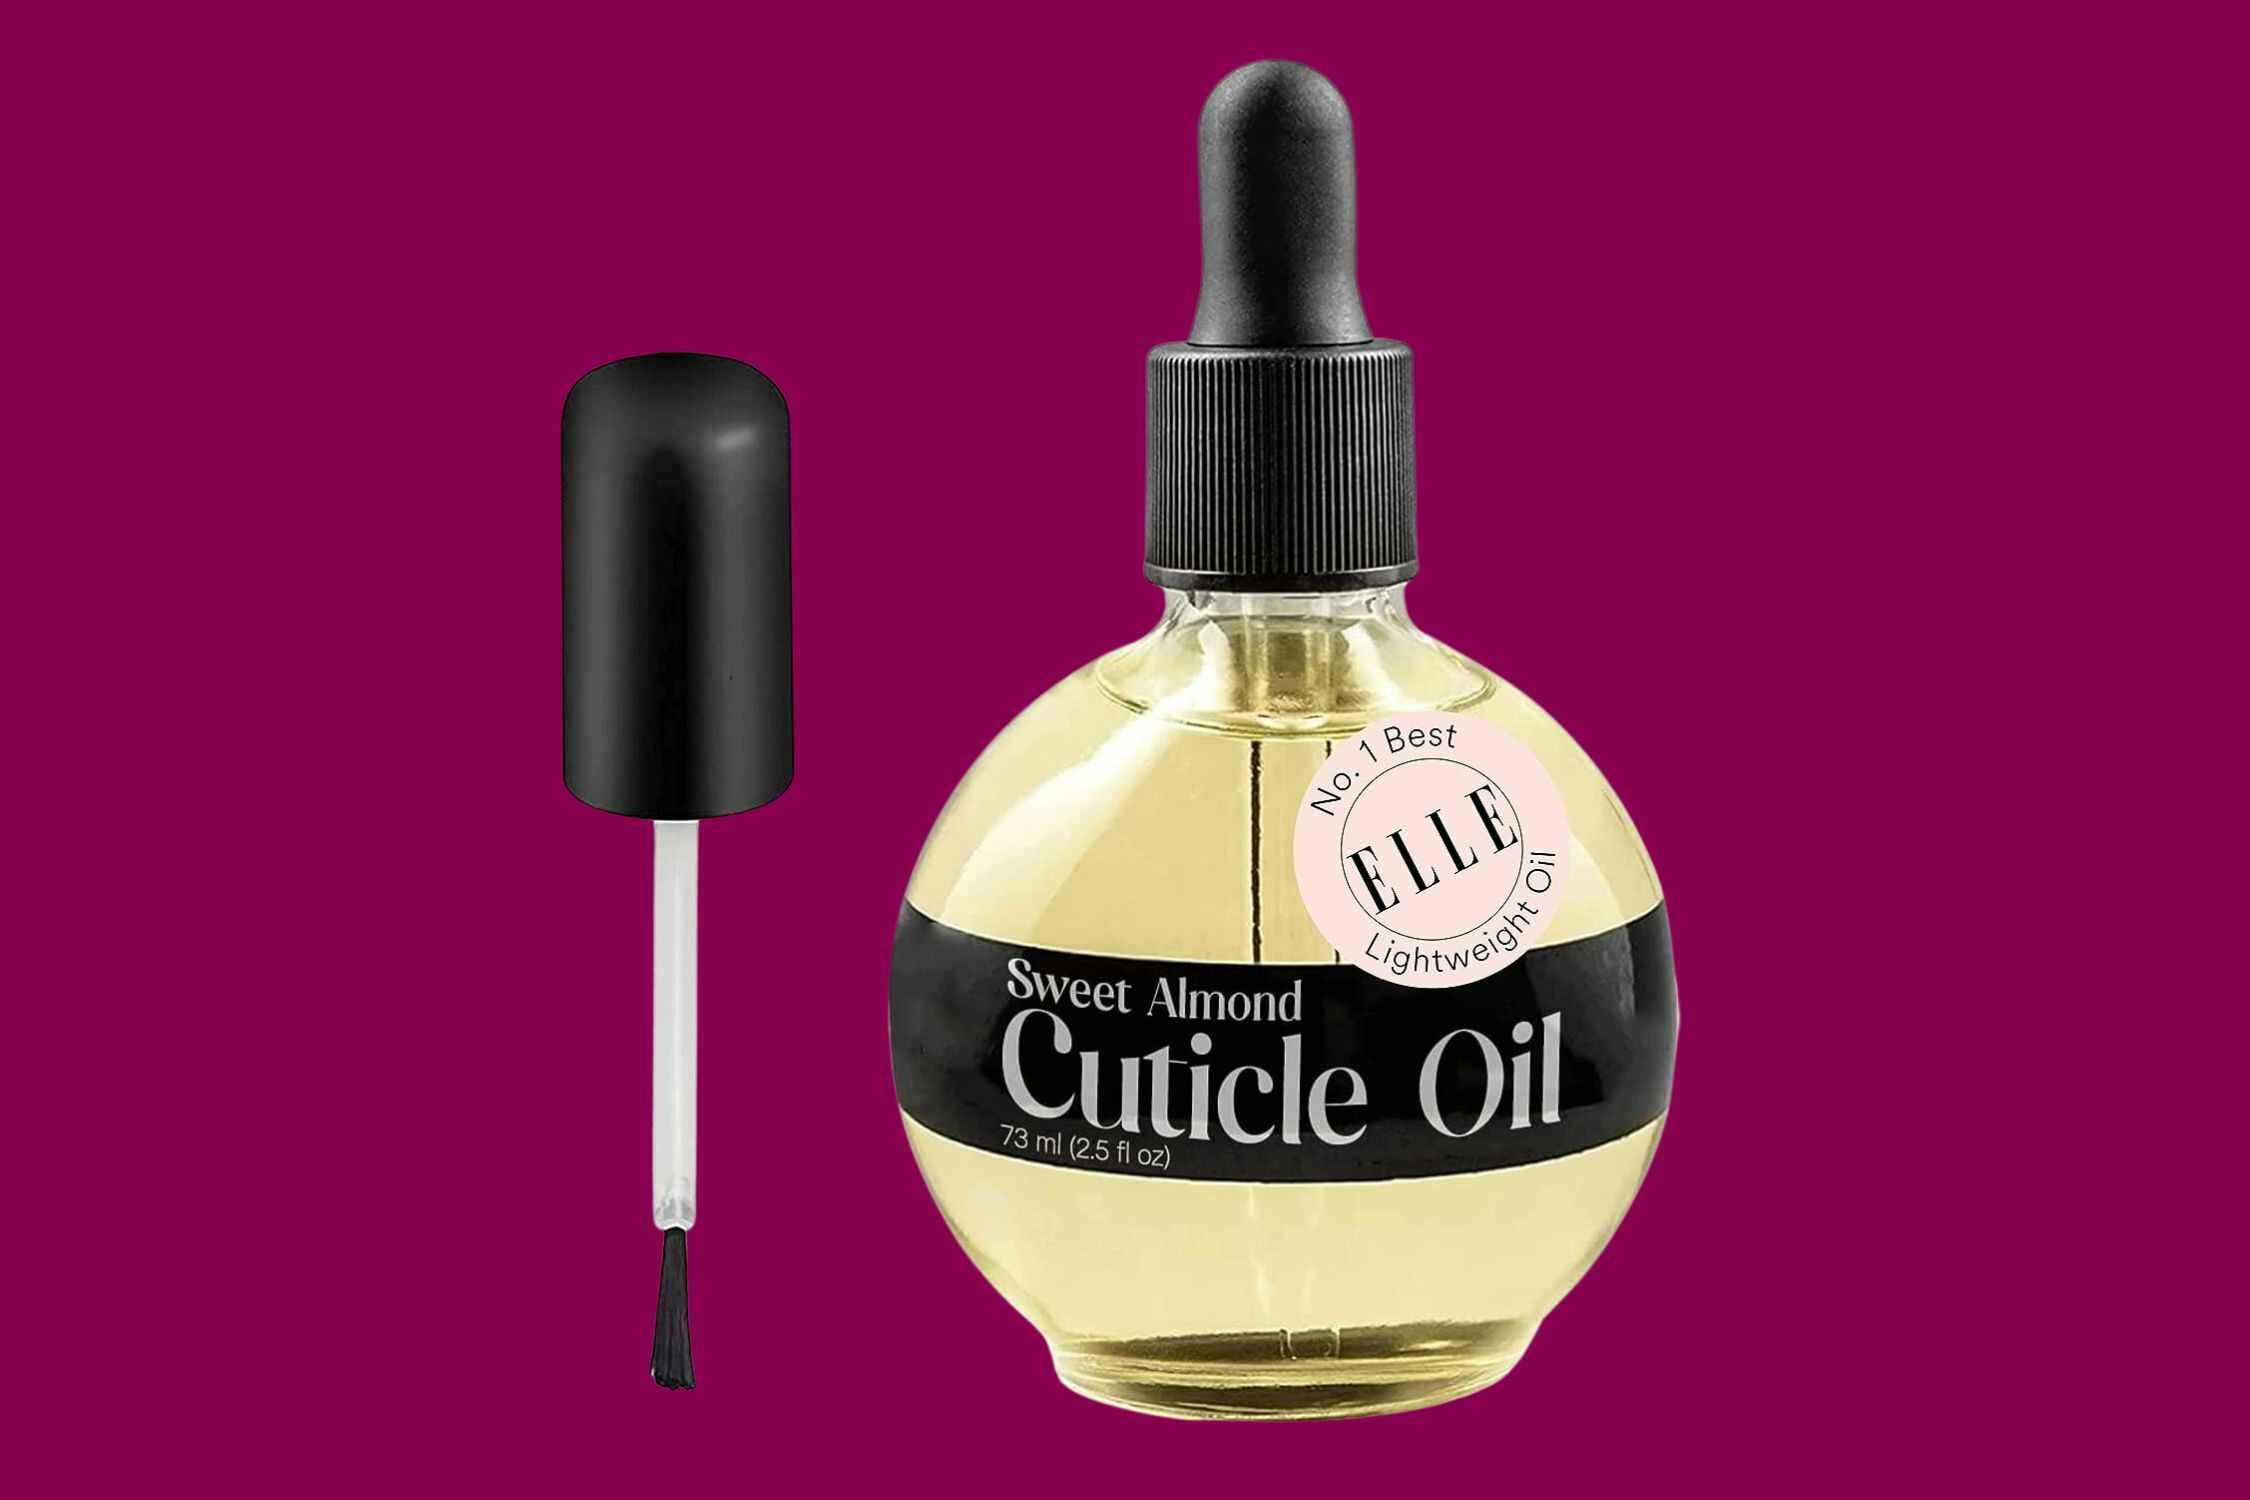 Sweet Almond Cuticle Oil, as Low as $6.59 on Amazon